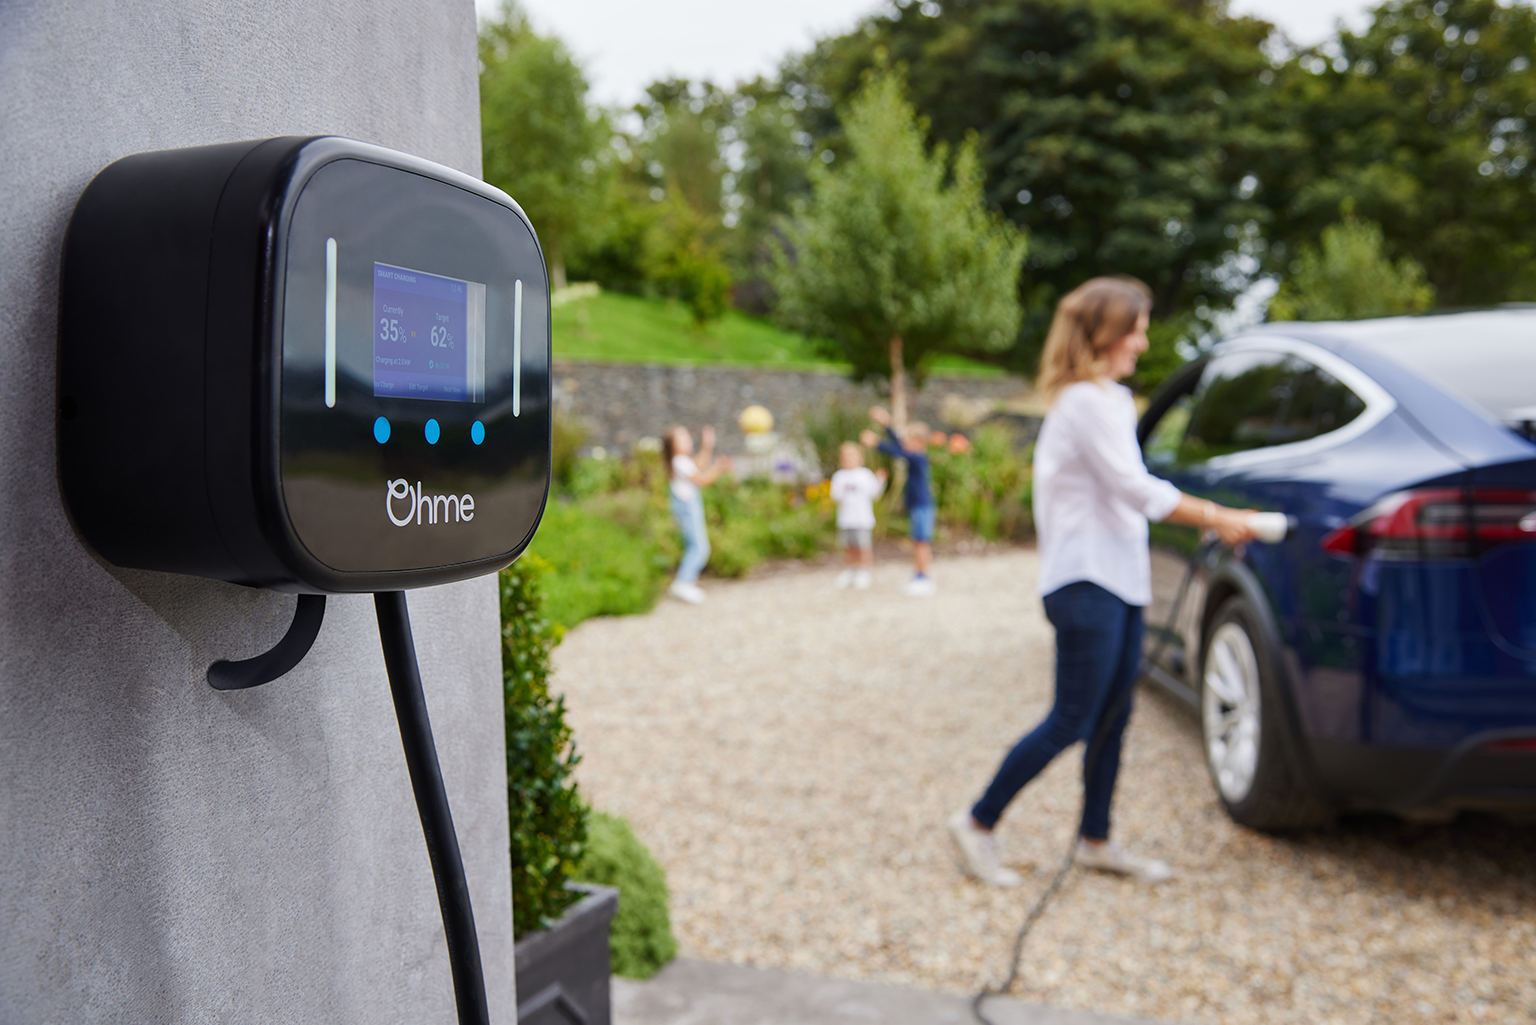 EV Charging Installers This is a Ohme Pro 3 year guarantee looks good and LED Display, one of the best on the market